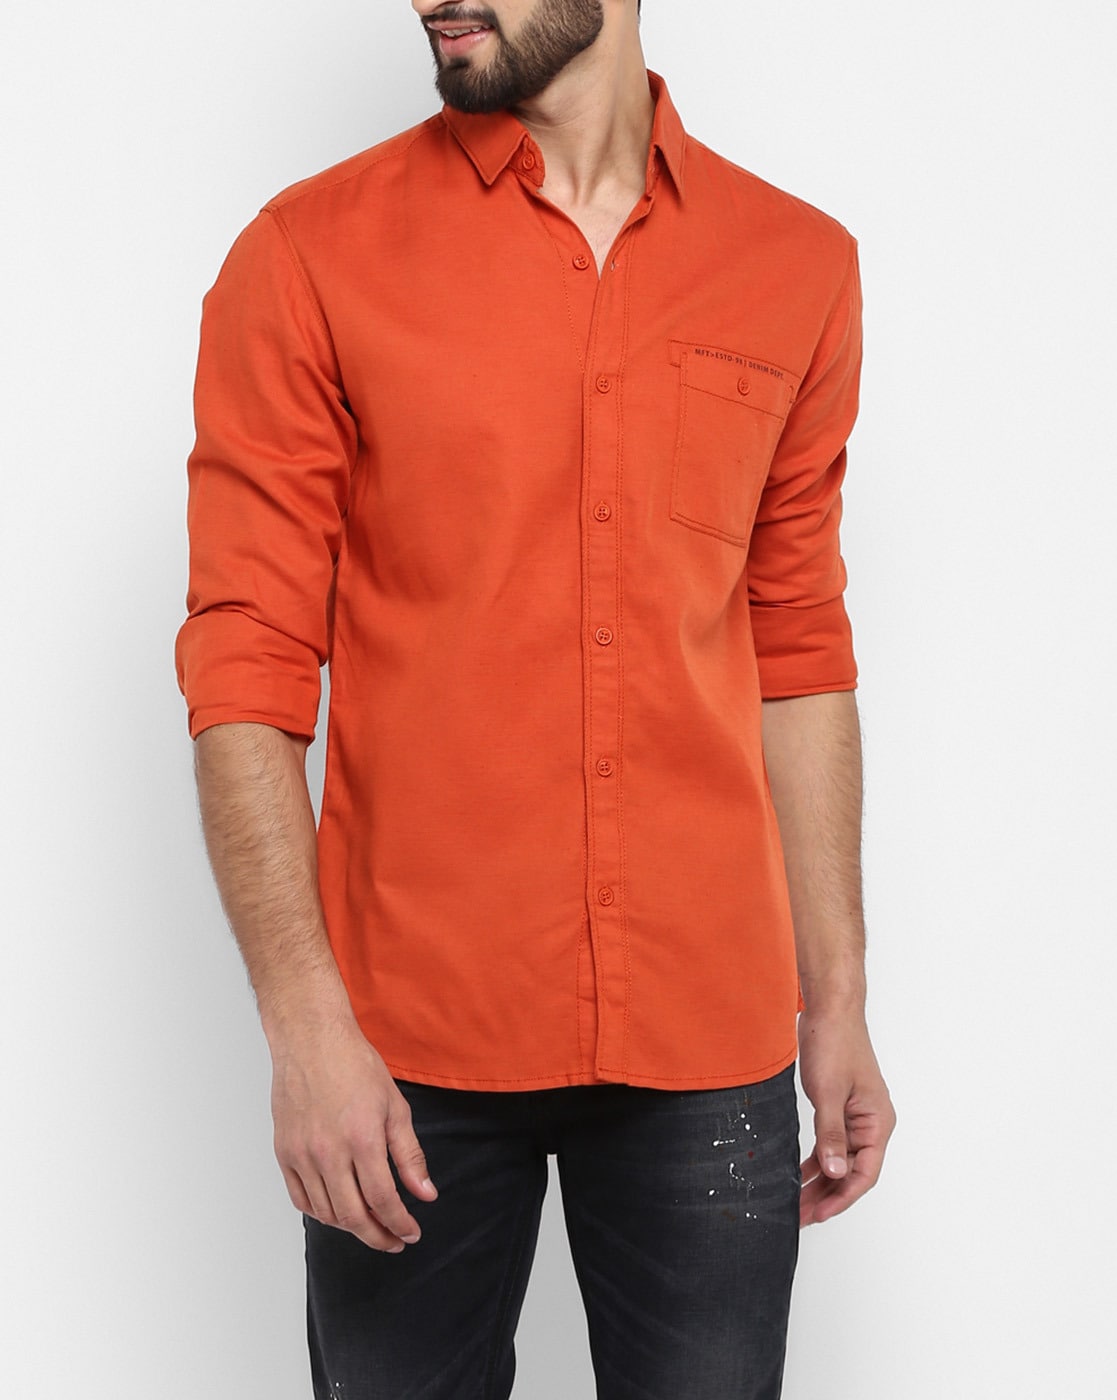 Buy Orange Shirts for Men by MUFTI ...